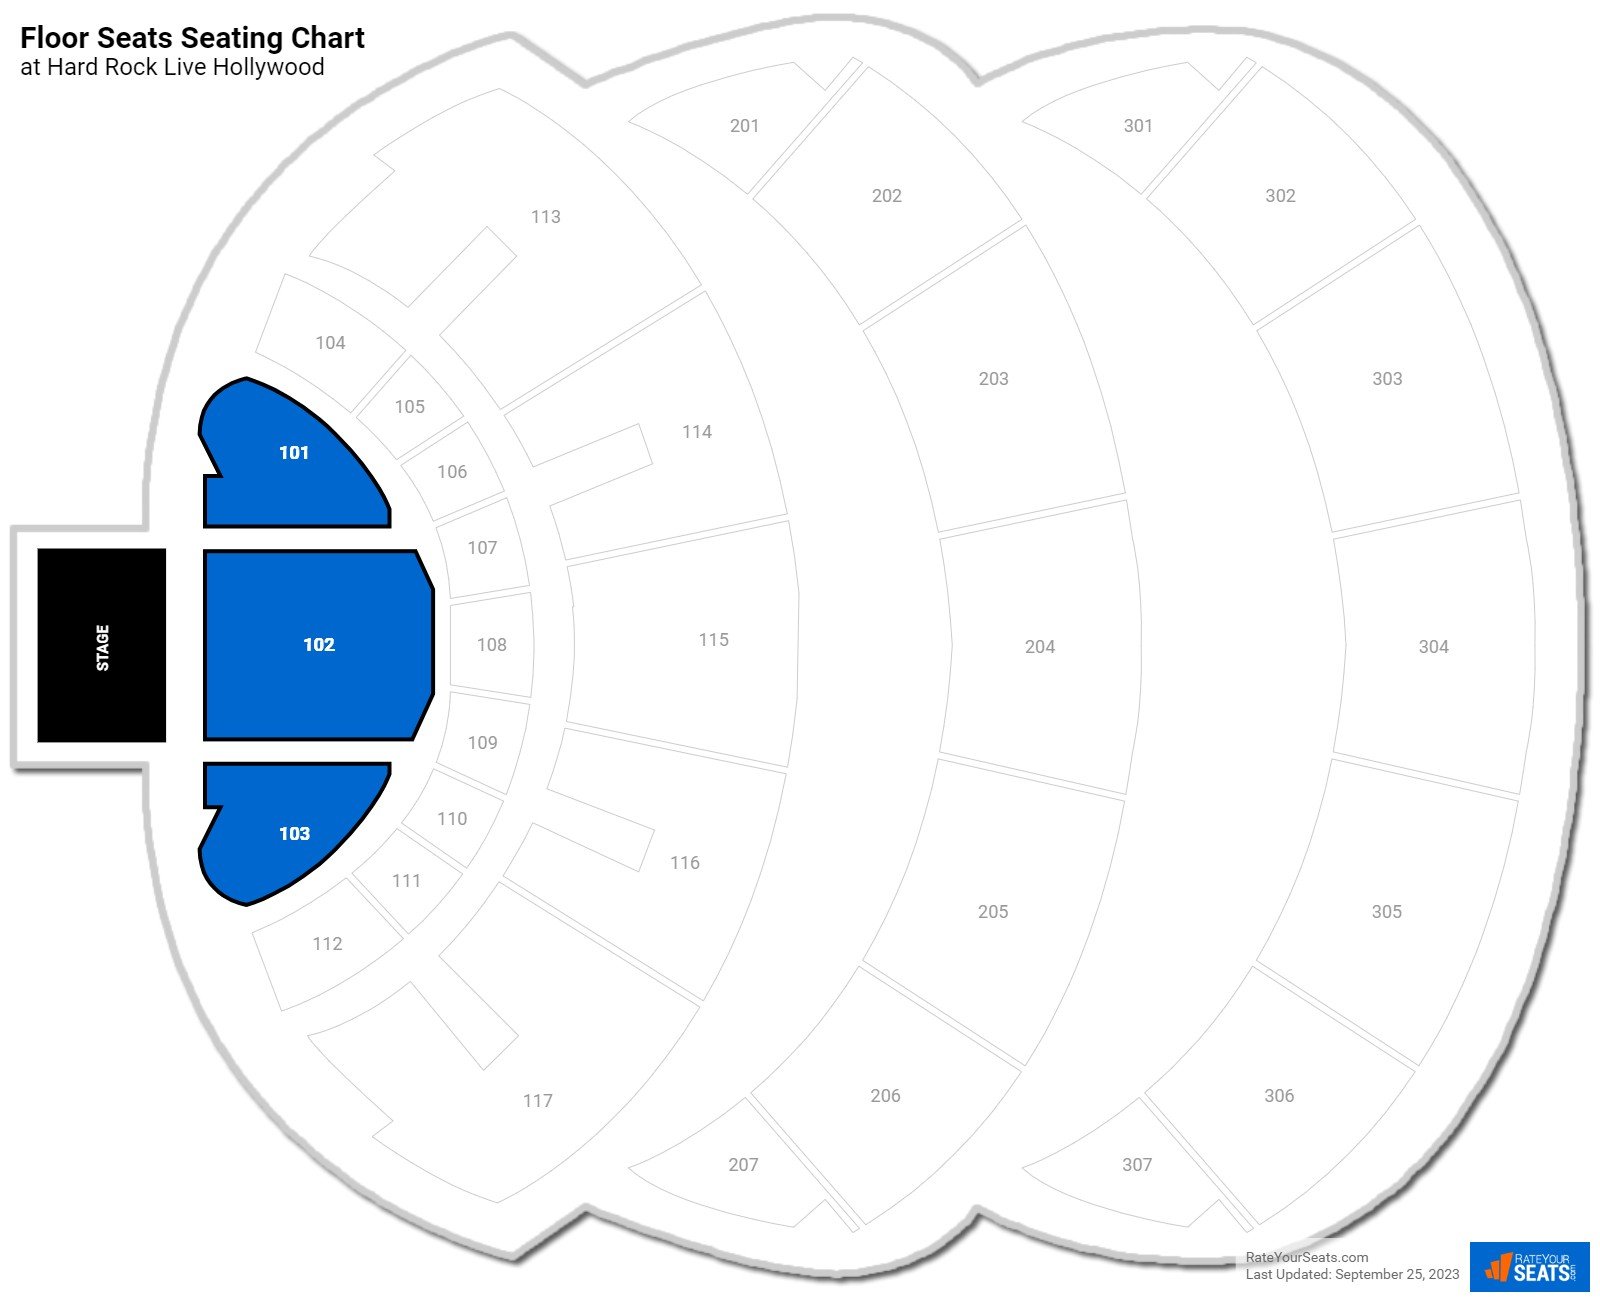 Concert Floor Seats Seating Chart at Hard Rock Live Hollywood